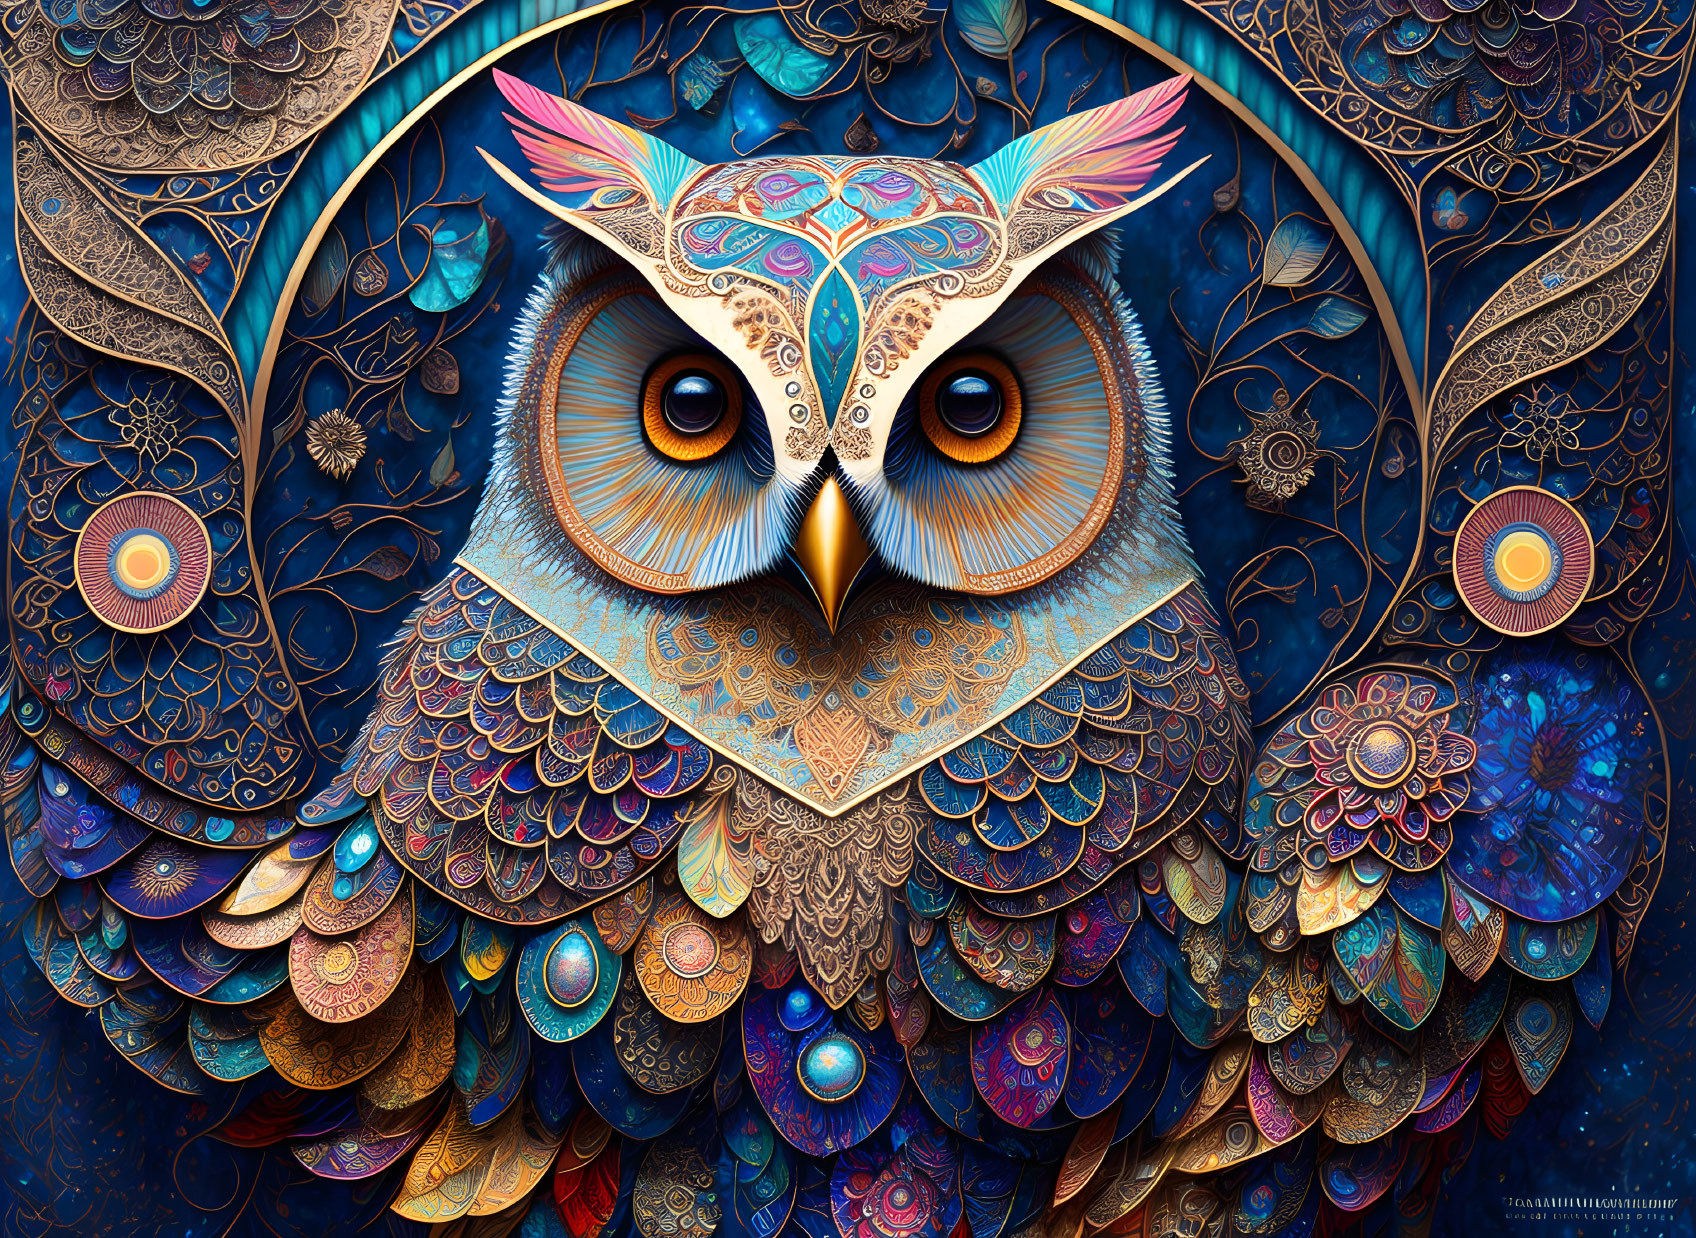 Stylized owl digital artwork in blue, gold, and brown hues